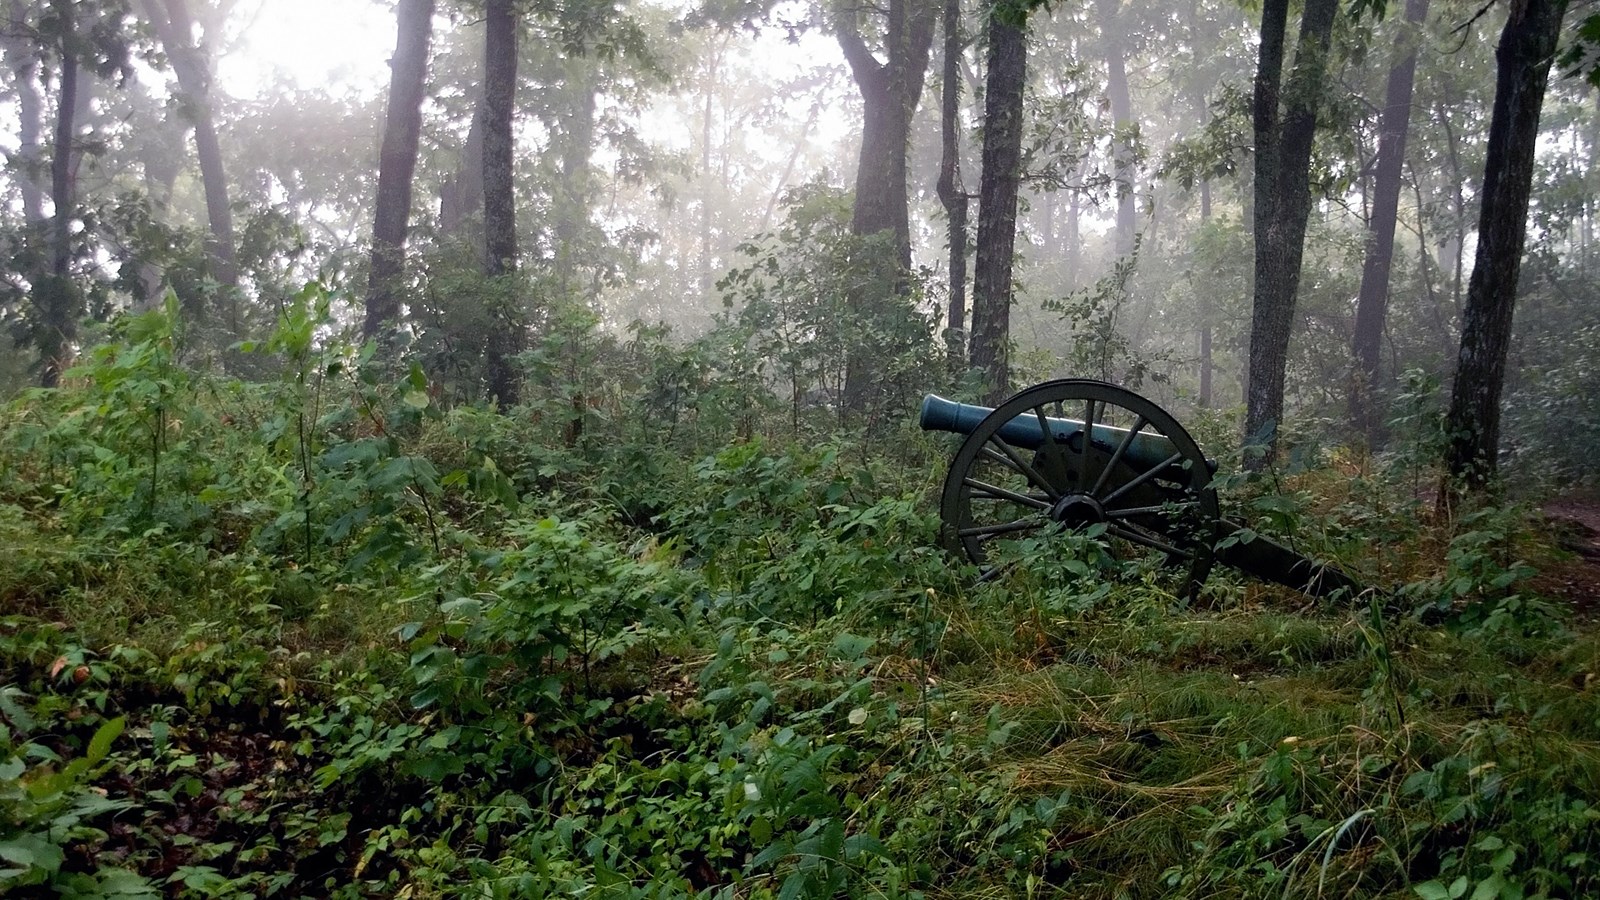 A large cannon surrounded by tangled green undergrowth